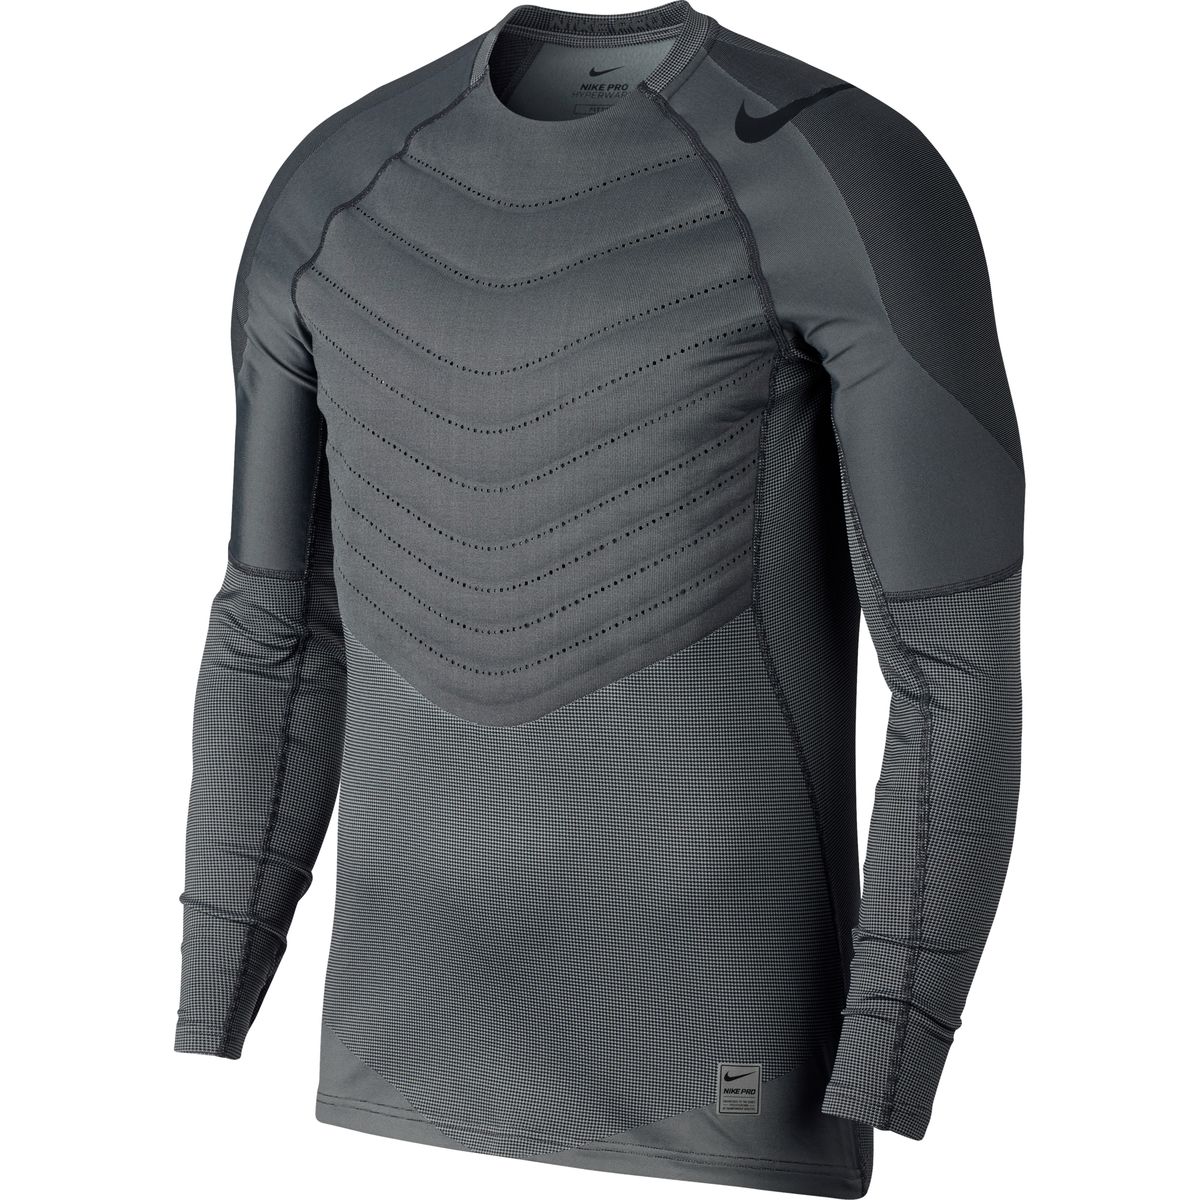 Nike Hyperwarm Fitted Top Men's - Clothing